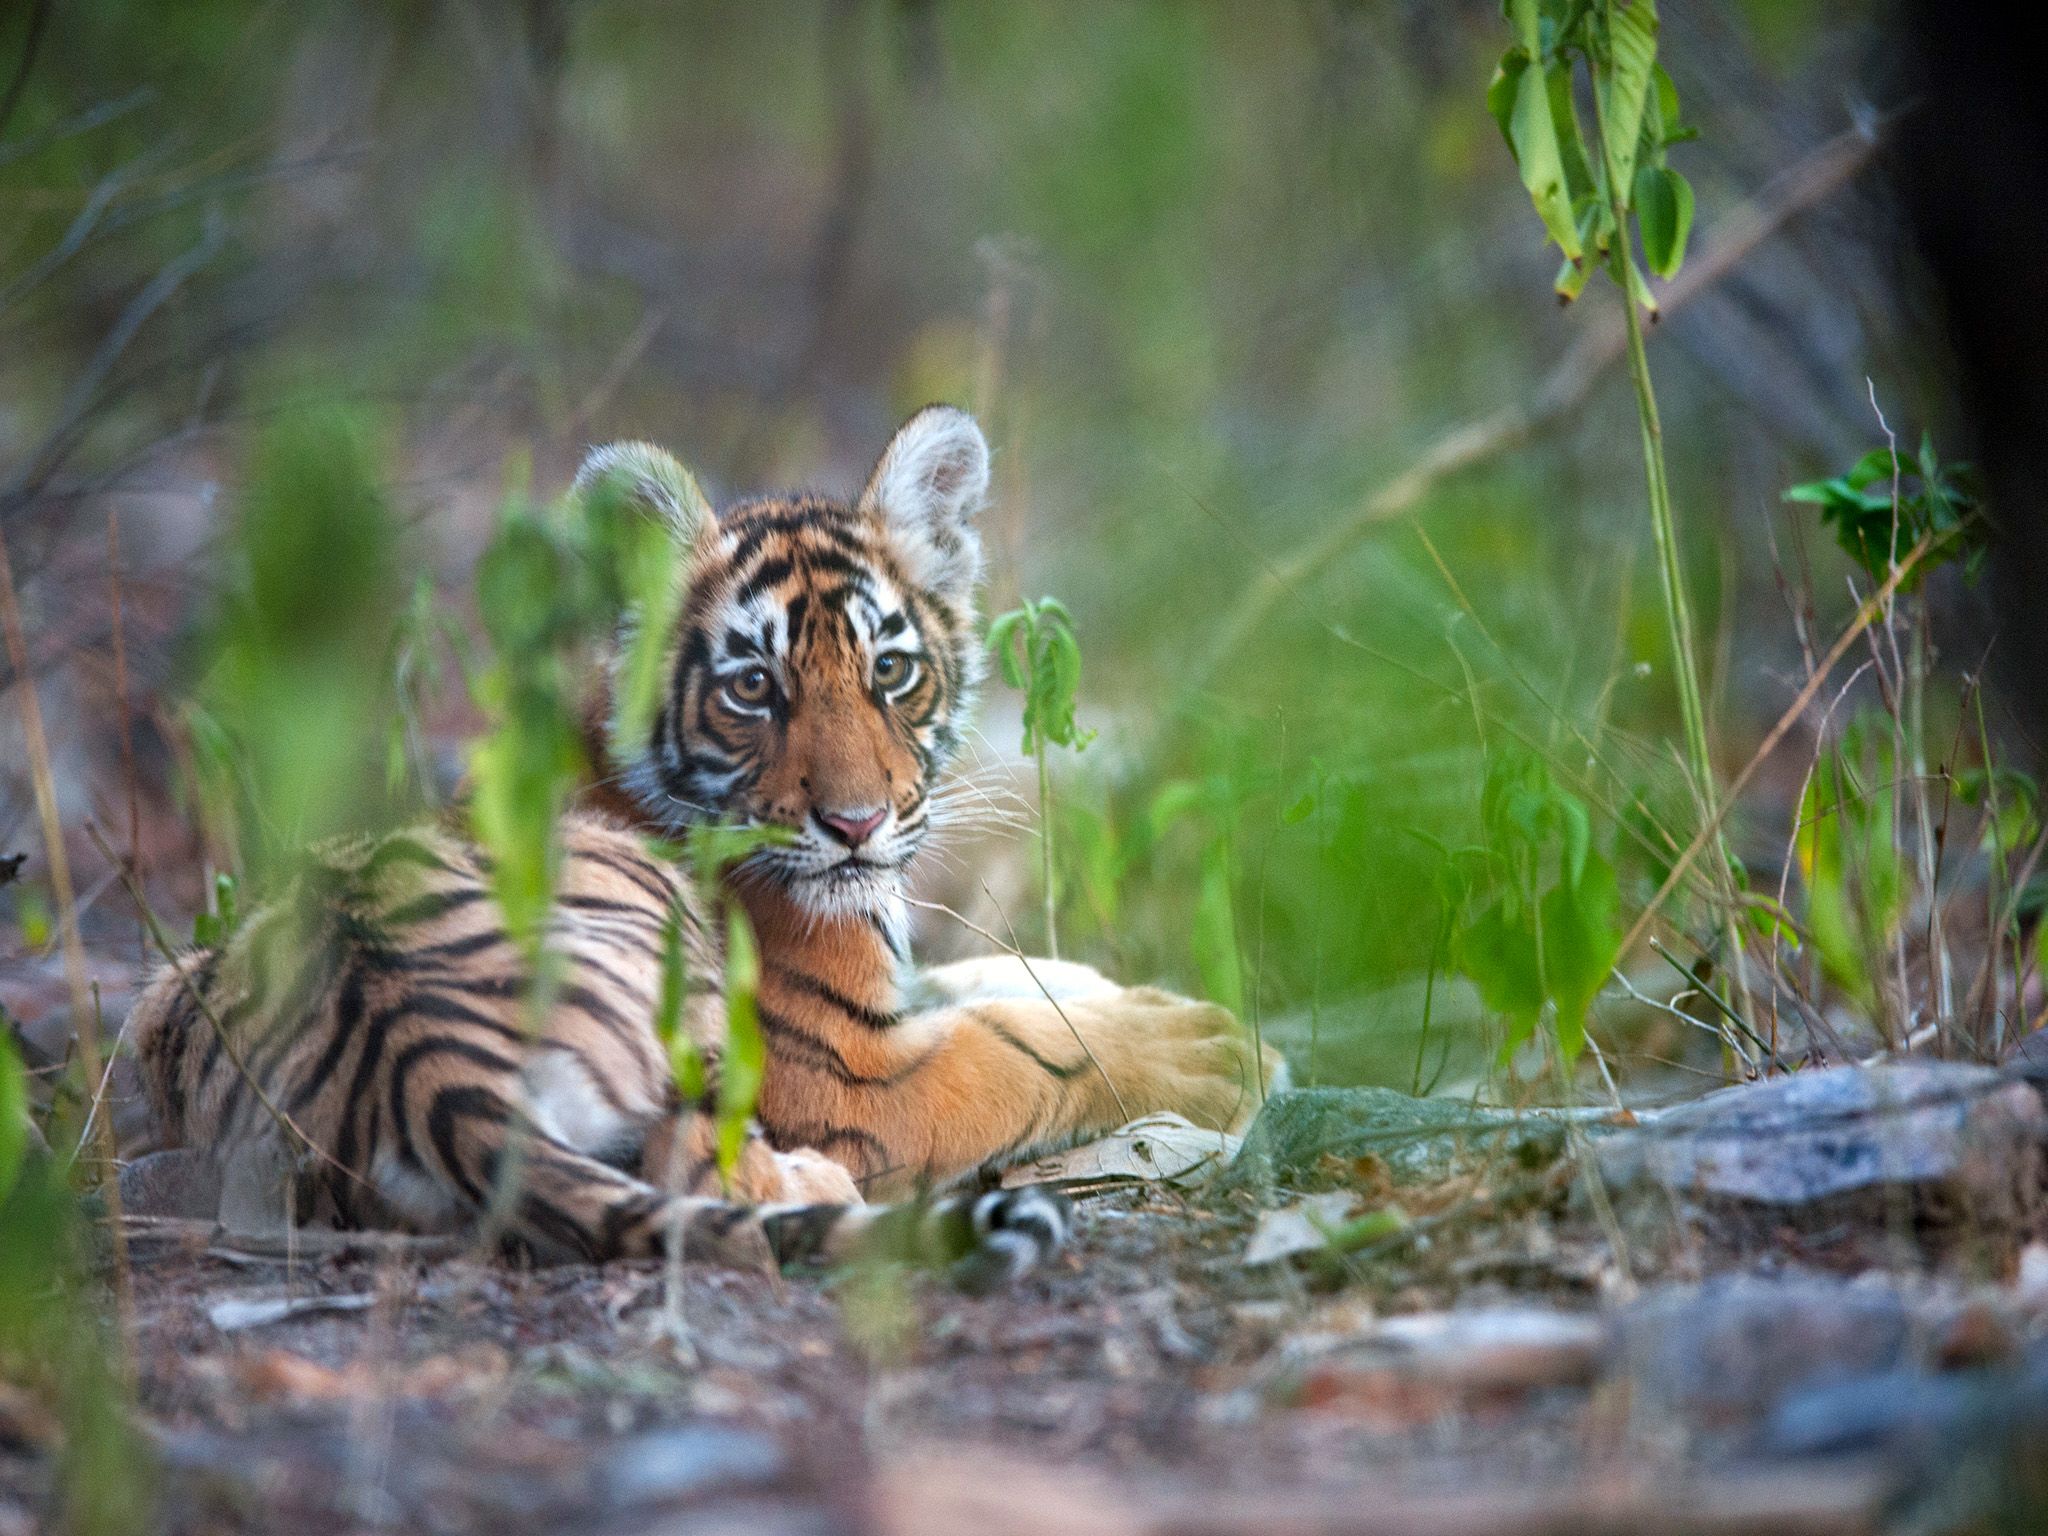 Rajbagh Area, Ranthambore National Park: Sundari's cub.  This image is from Tiger's Revenge. [Photo of the day - February 2015]